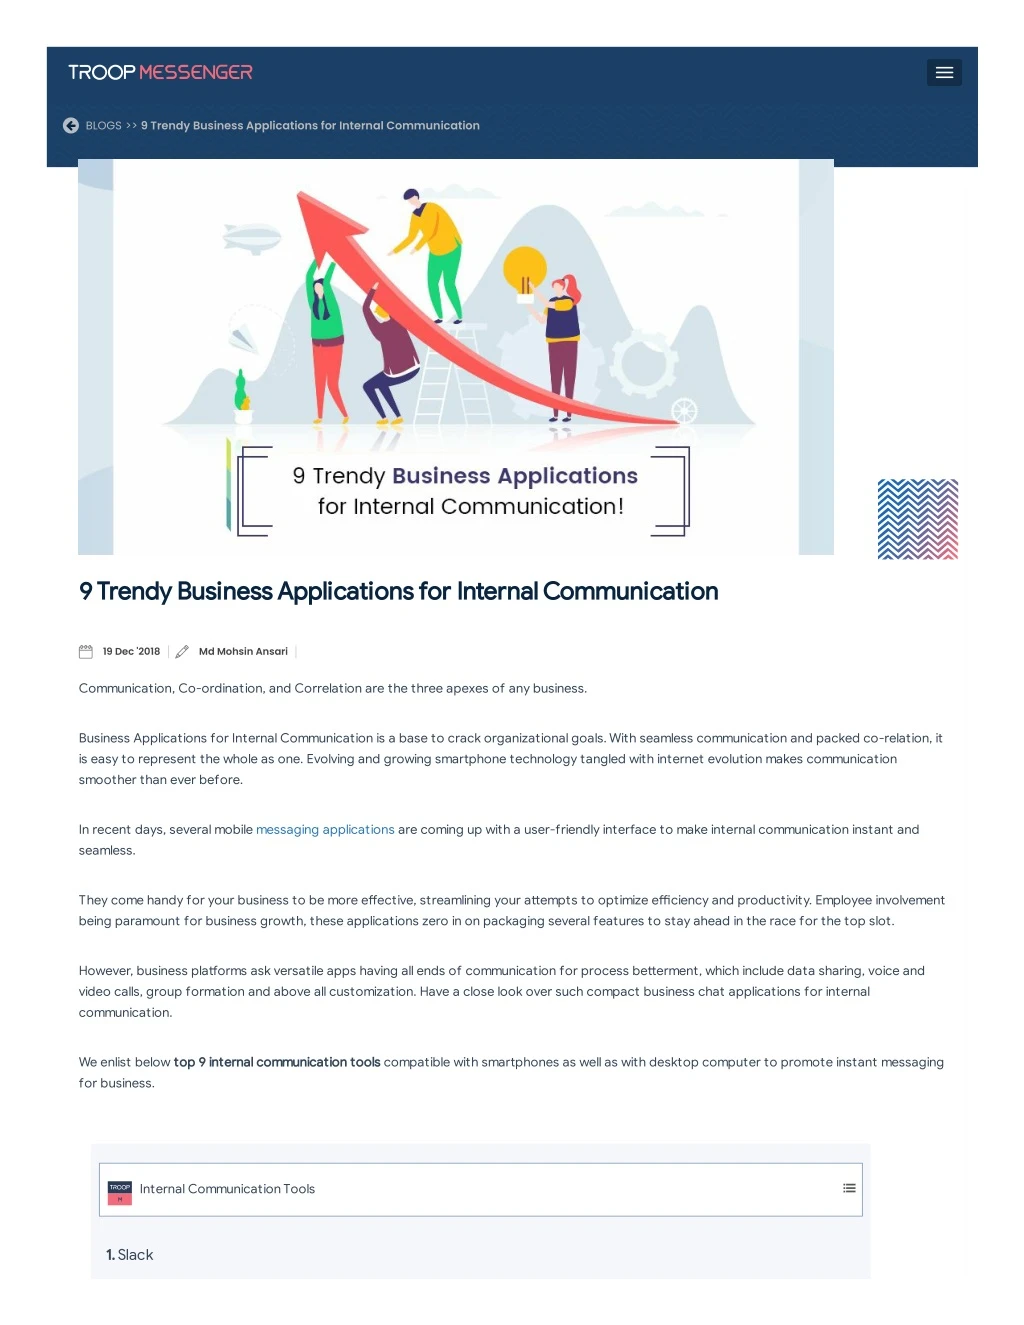 blogs 9 trendy business applications for internal